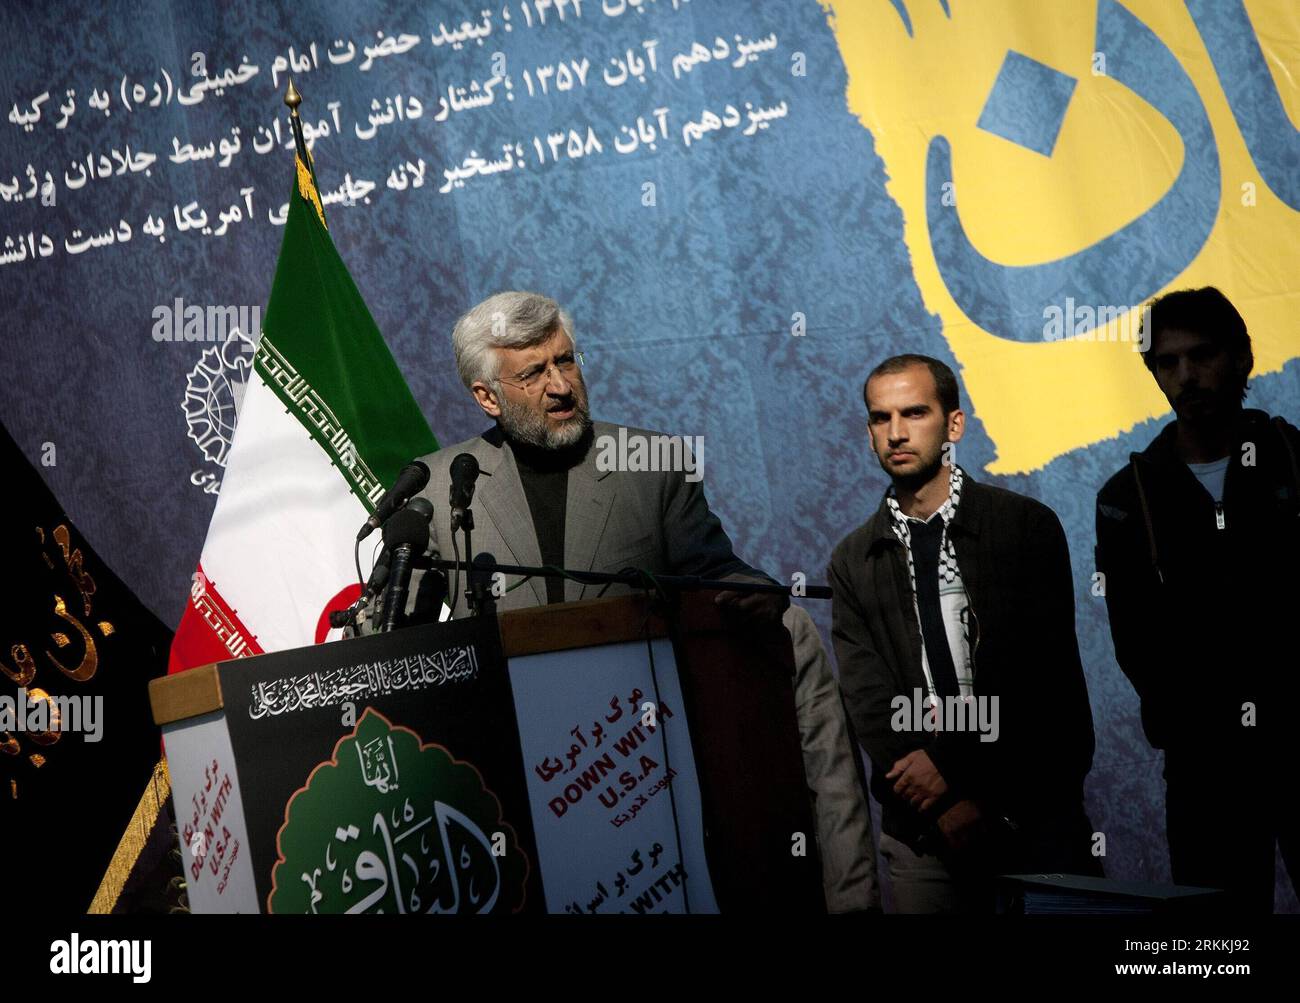 111104 -- TEHRAN, Nov. 4, 2011 Xinhua -- Iran s chief nuclear negotiator Saeed Jalili speaks during a rally marking the 32nd anniversary of the seizure of the U.S. Embassy in downtown Tehran, Iran, Nov. 4, 2011. Iranians on Friday marked the anniversary of the seizure of the U.S. embassy in Tehran by Iranian students 32 years ago. The United States cut diplomatic relations with Iran on April 7, 1980, after a group of Iranian students seized the U.S. embassy in Tehran and captured some 60 U.S. diplomats in 1979. In the hostage crisis, 52 of the U.S. diplomats were held in captivity for 444 days Stock Photo